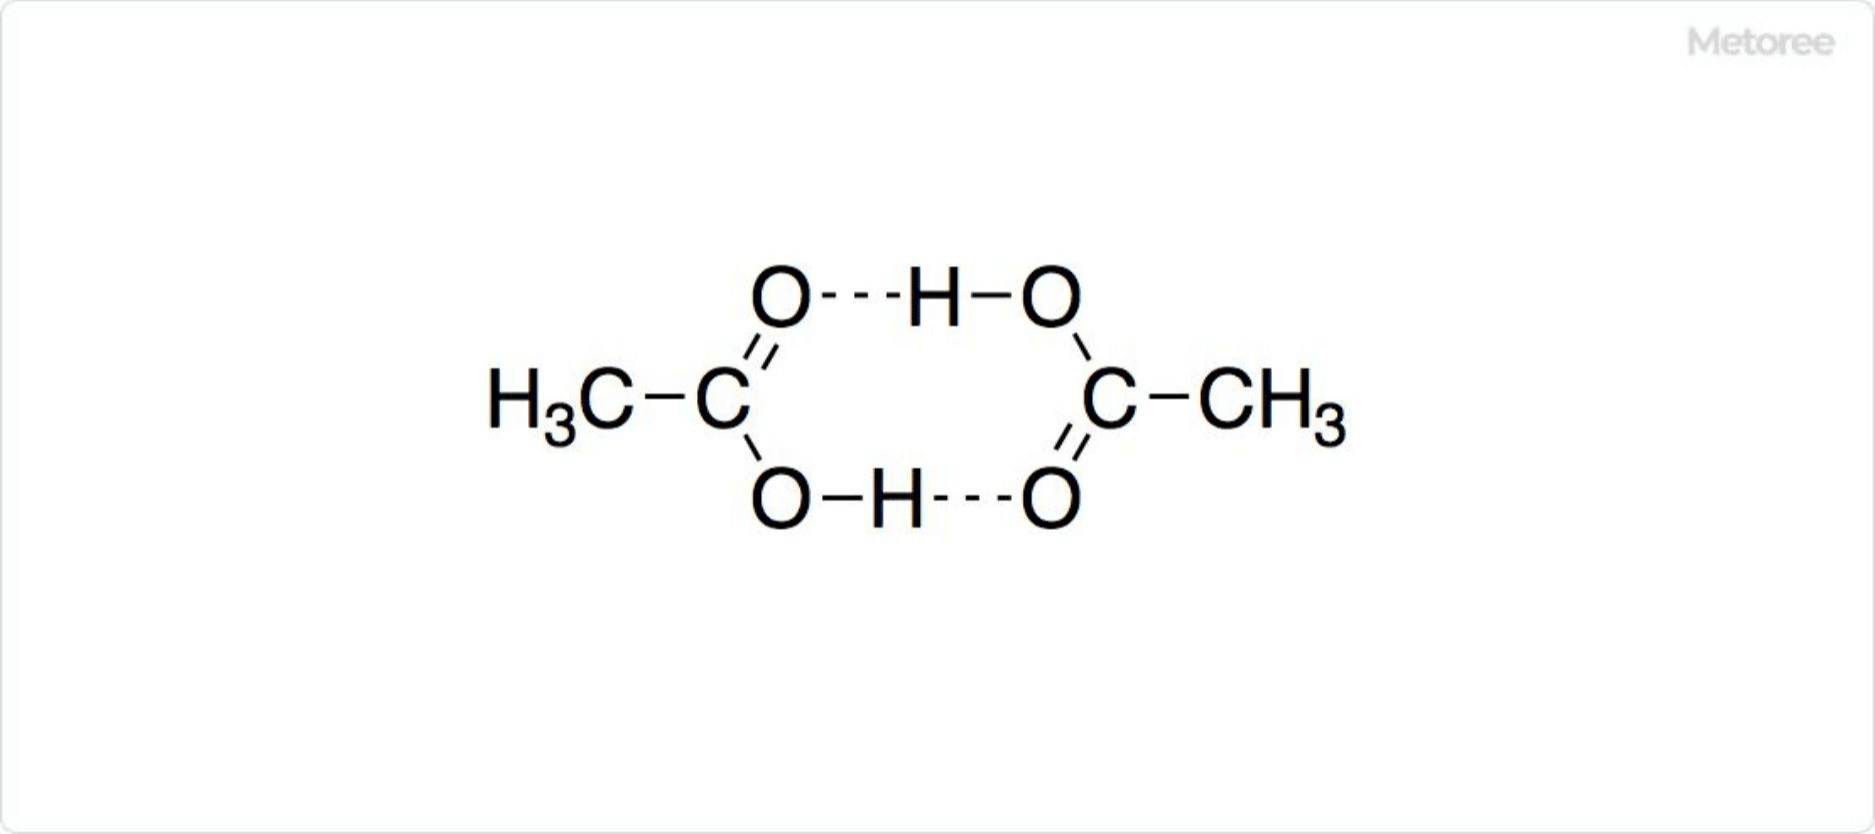 Figure 2. Structure of the Dimer of Acetic Acid